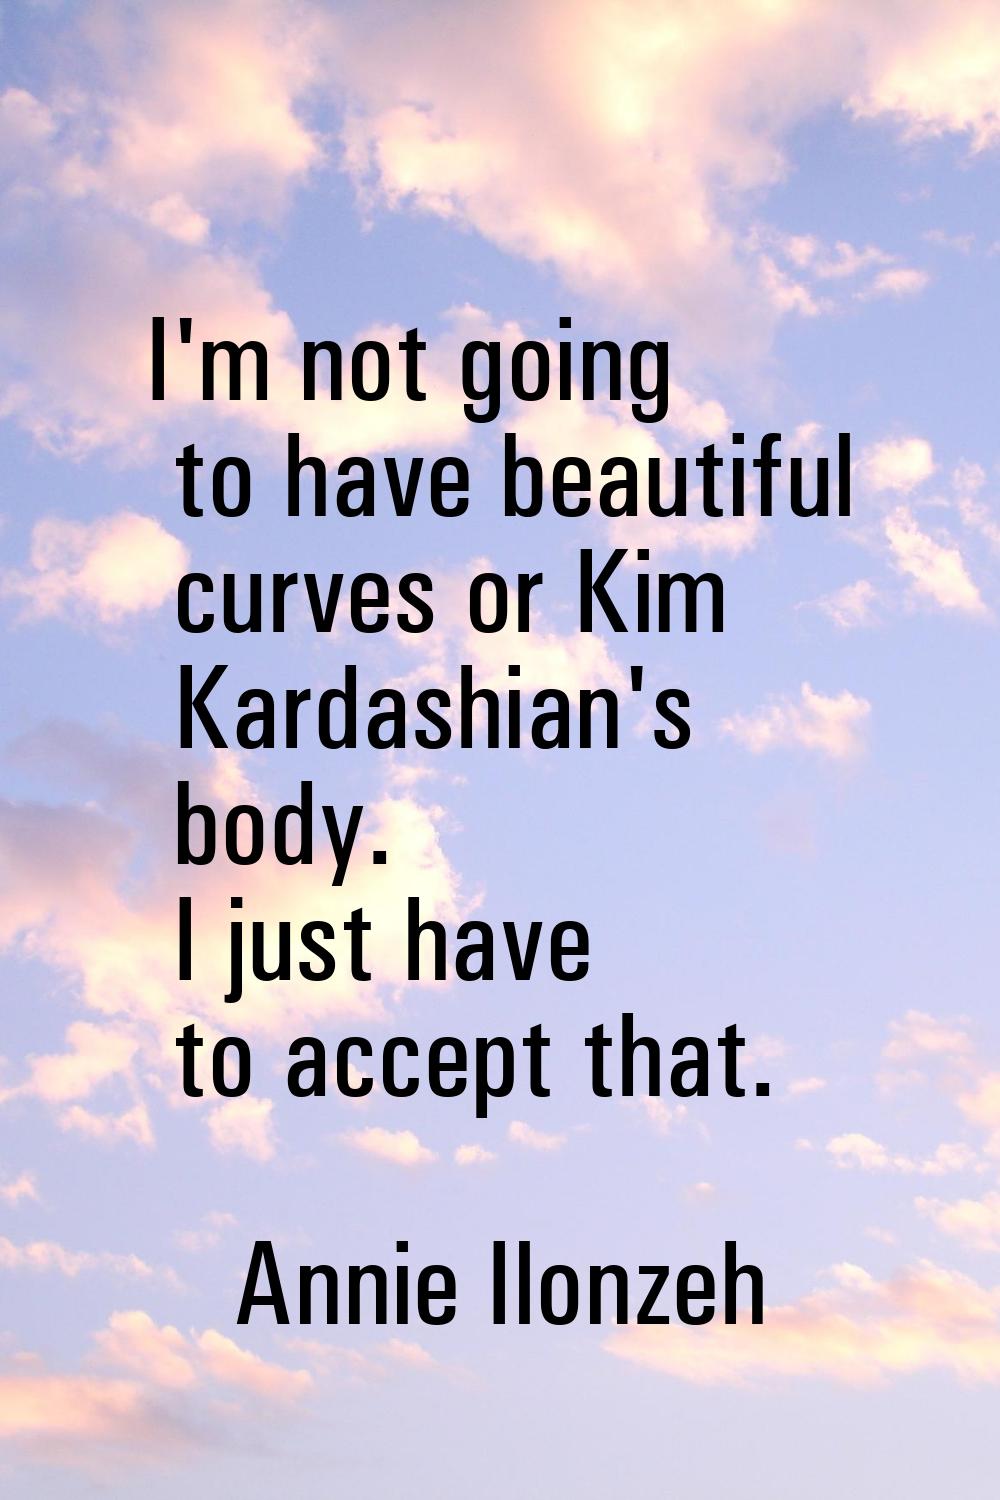 I'm not going to have beautiful curves or Kim Kardashian's body. I just have to accept that.